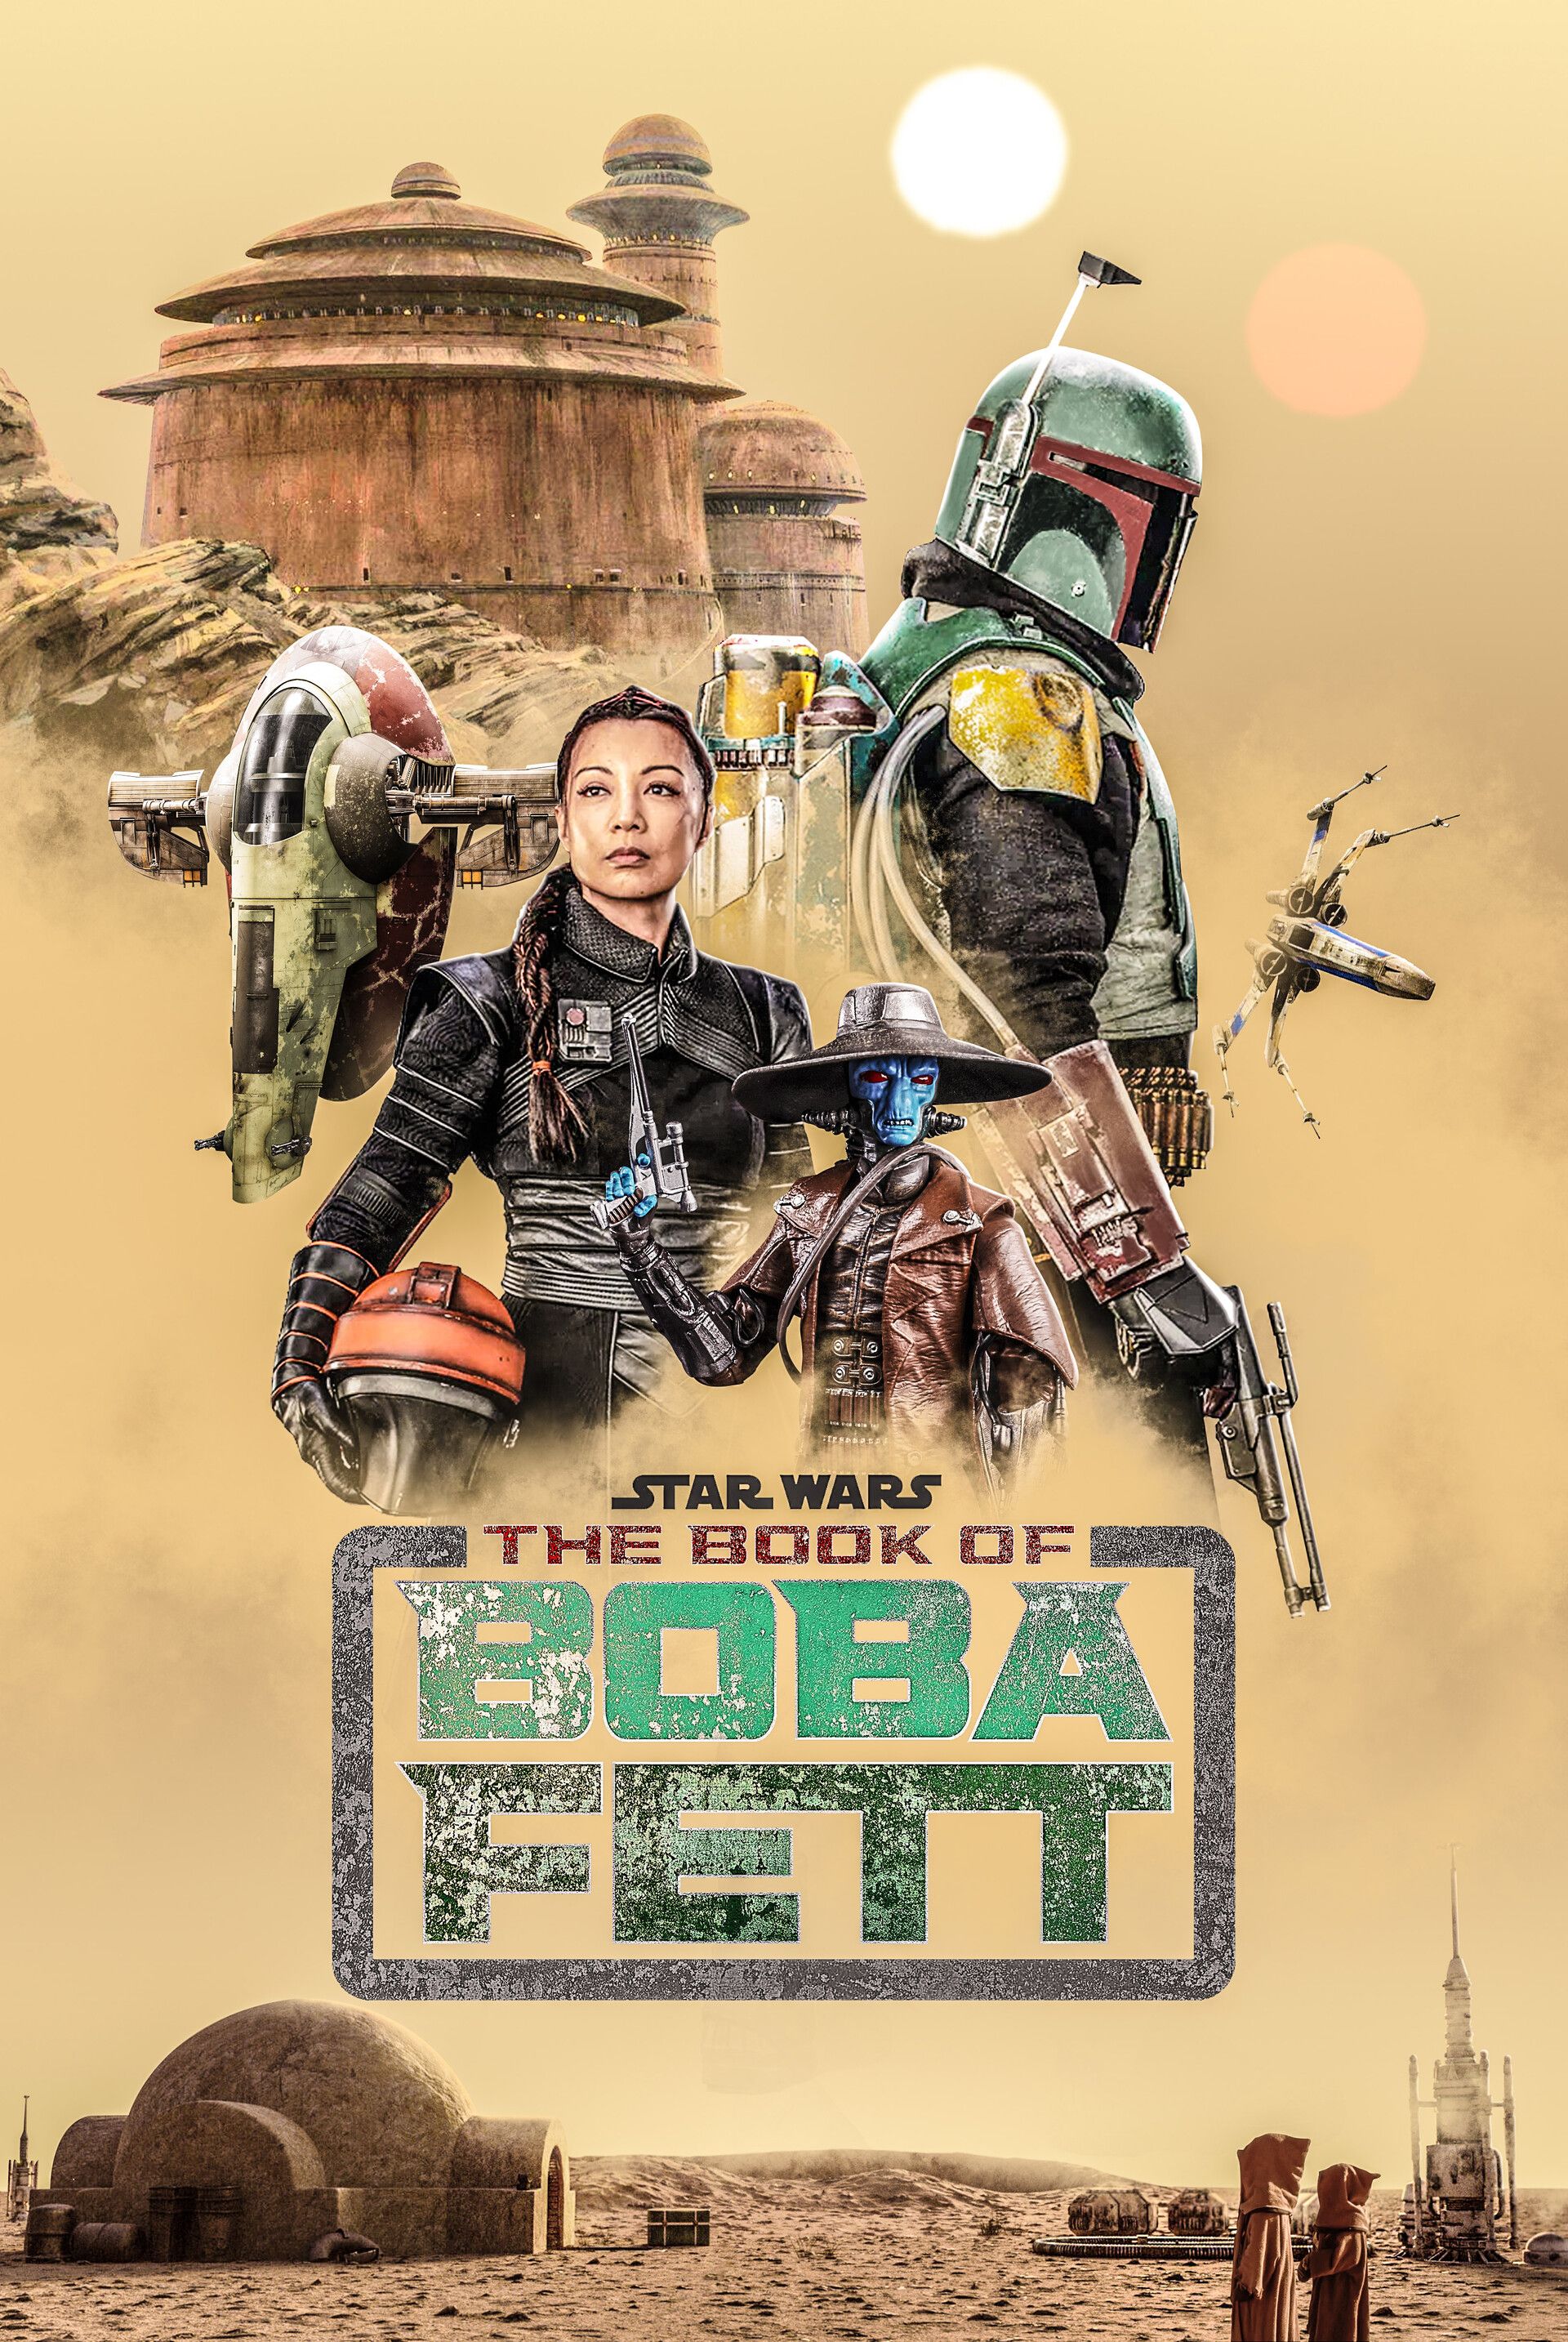 The Book of Boba Fett Poster, Roberto Chávez. Star wars drawings, Star wars background, Star wars books